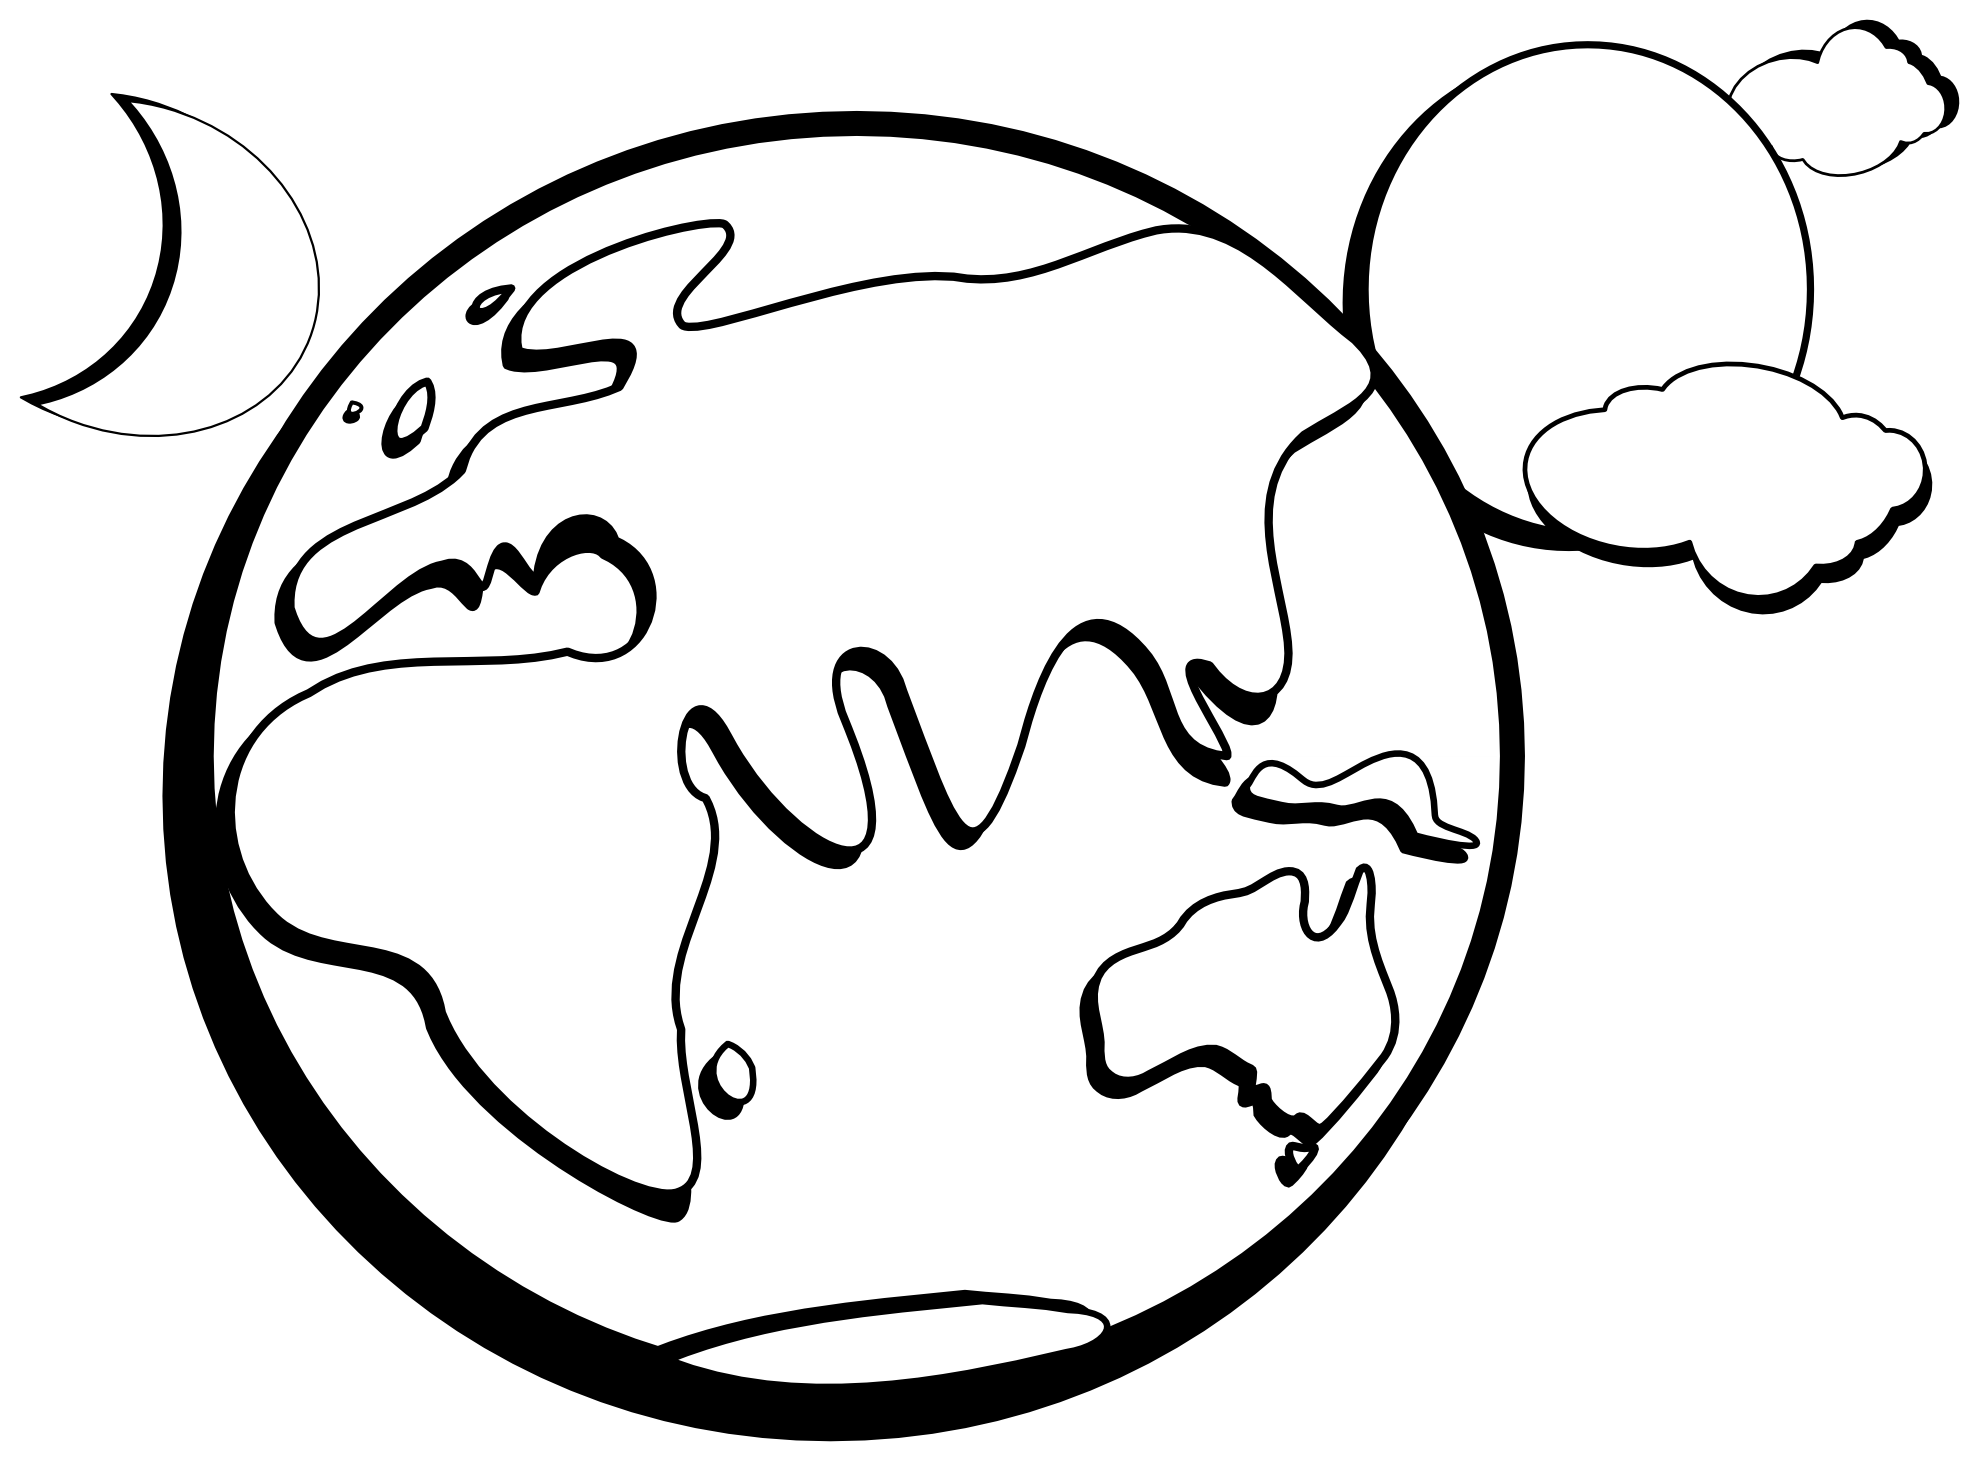 rygle Aussie Earth Colour Outline 1 black white  - Clipart library 